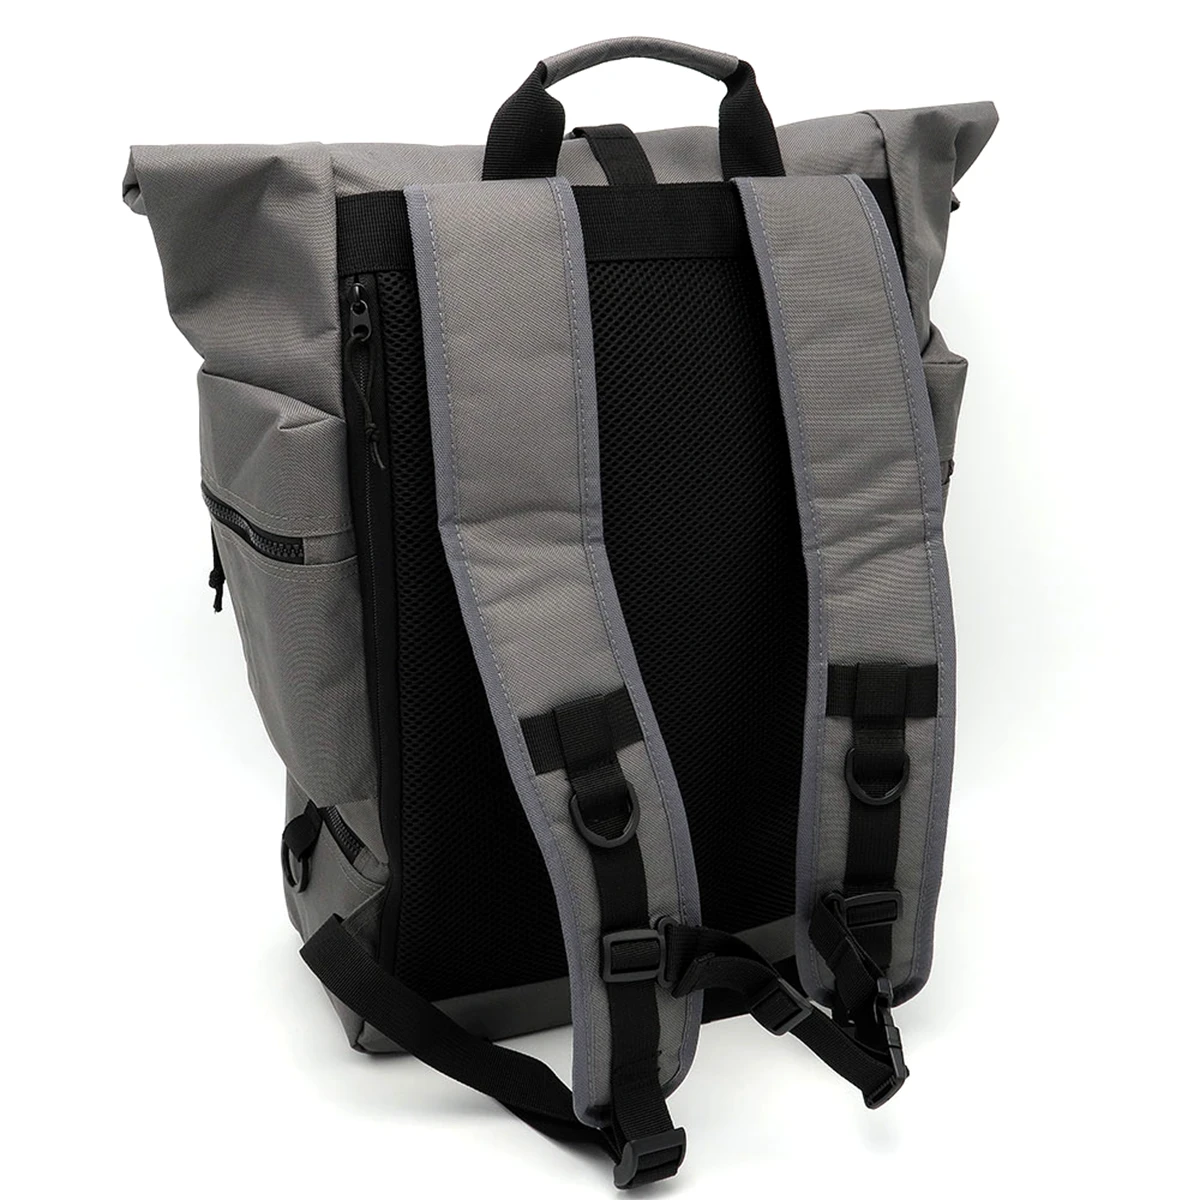 Call of Duty Rolltop Backpack "Blind" Grey Image 4